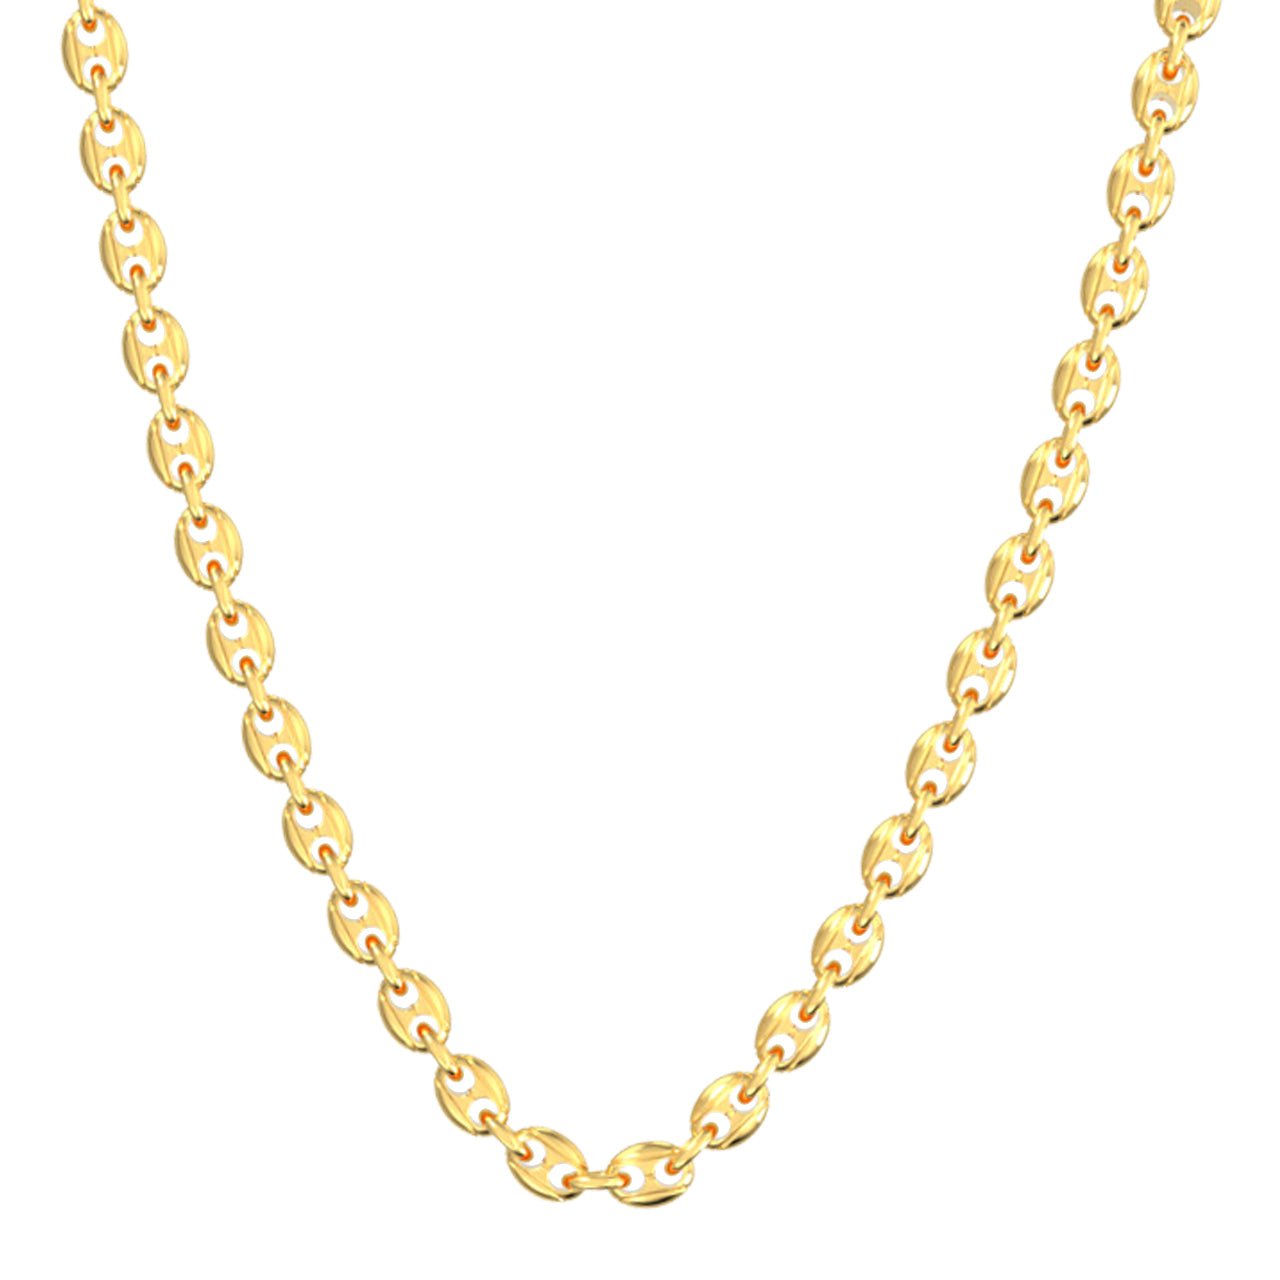 14k Gold Necklaces: Solid Gold Chains, Charms & More